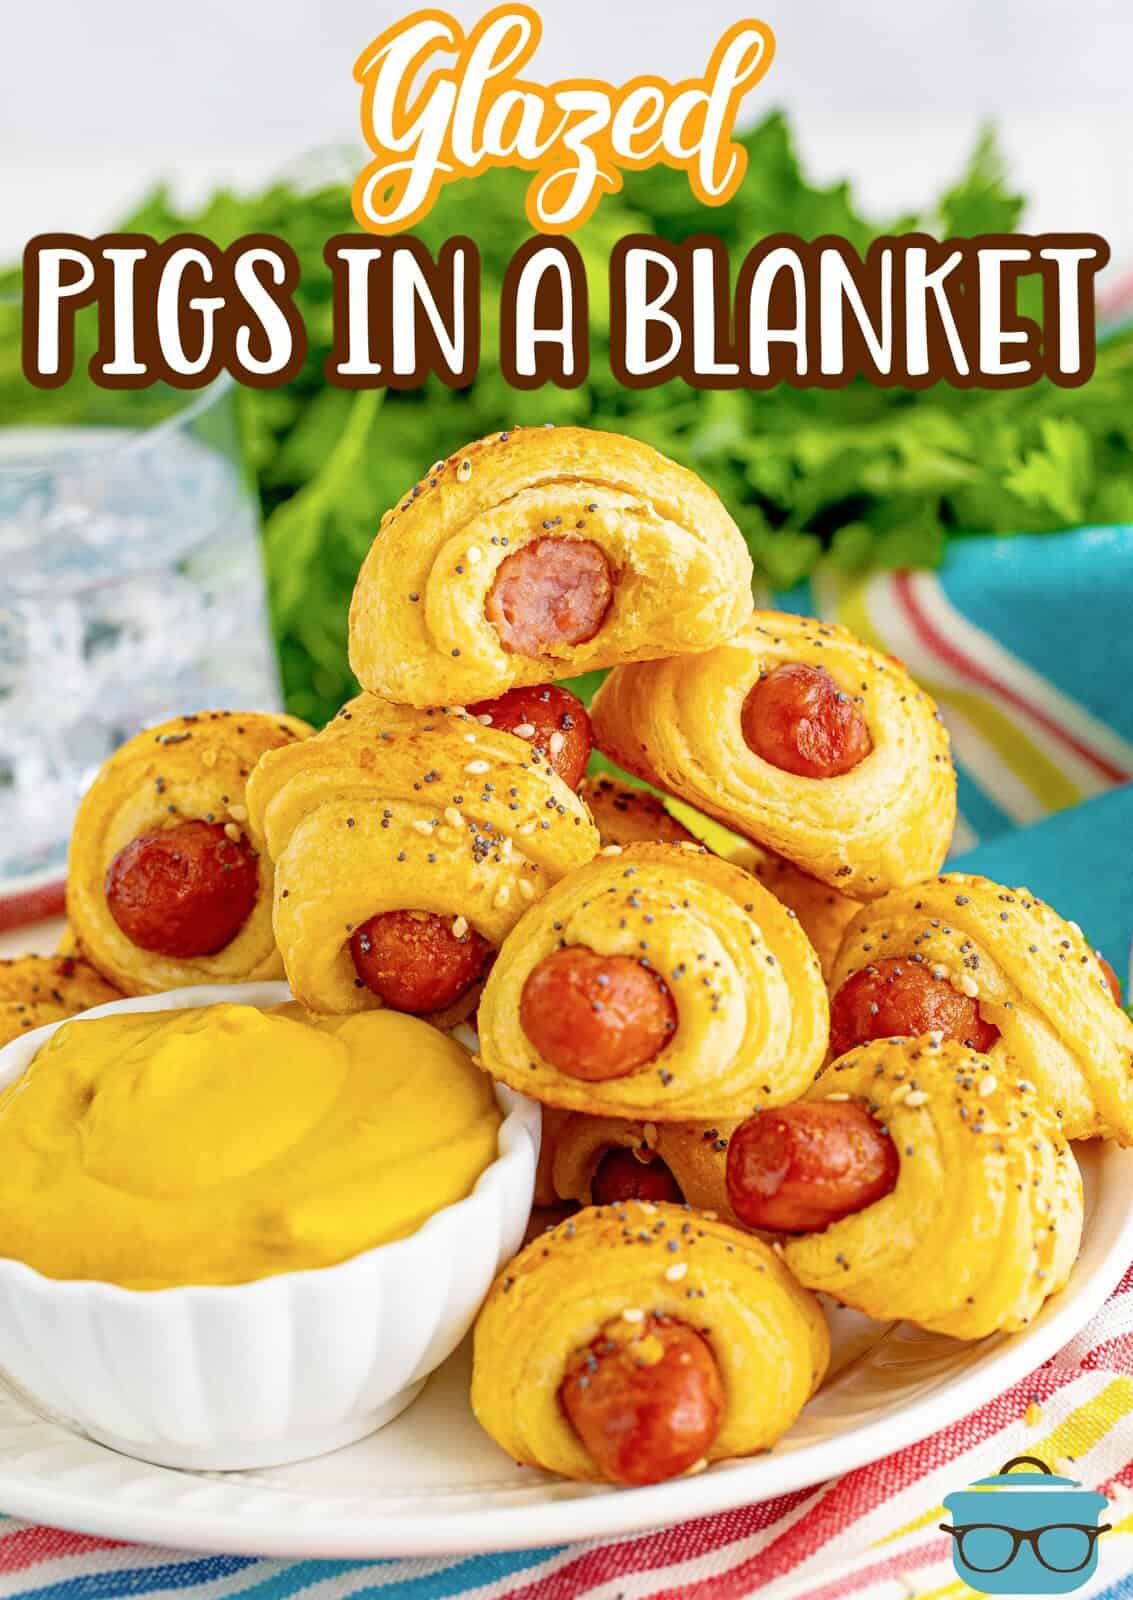 Pinterest image of stacked Glazed Pigs in a Blanket with bite taken out of top one on plate with dipping sauce.